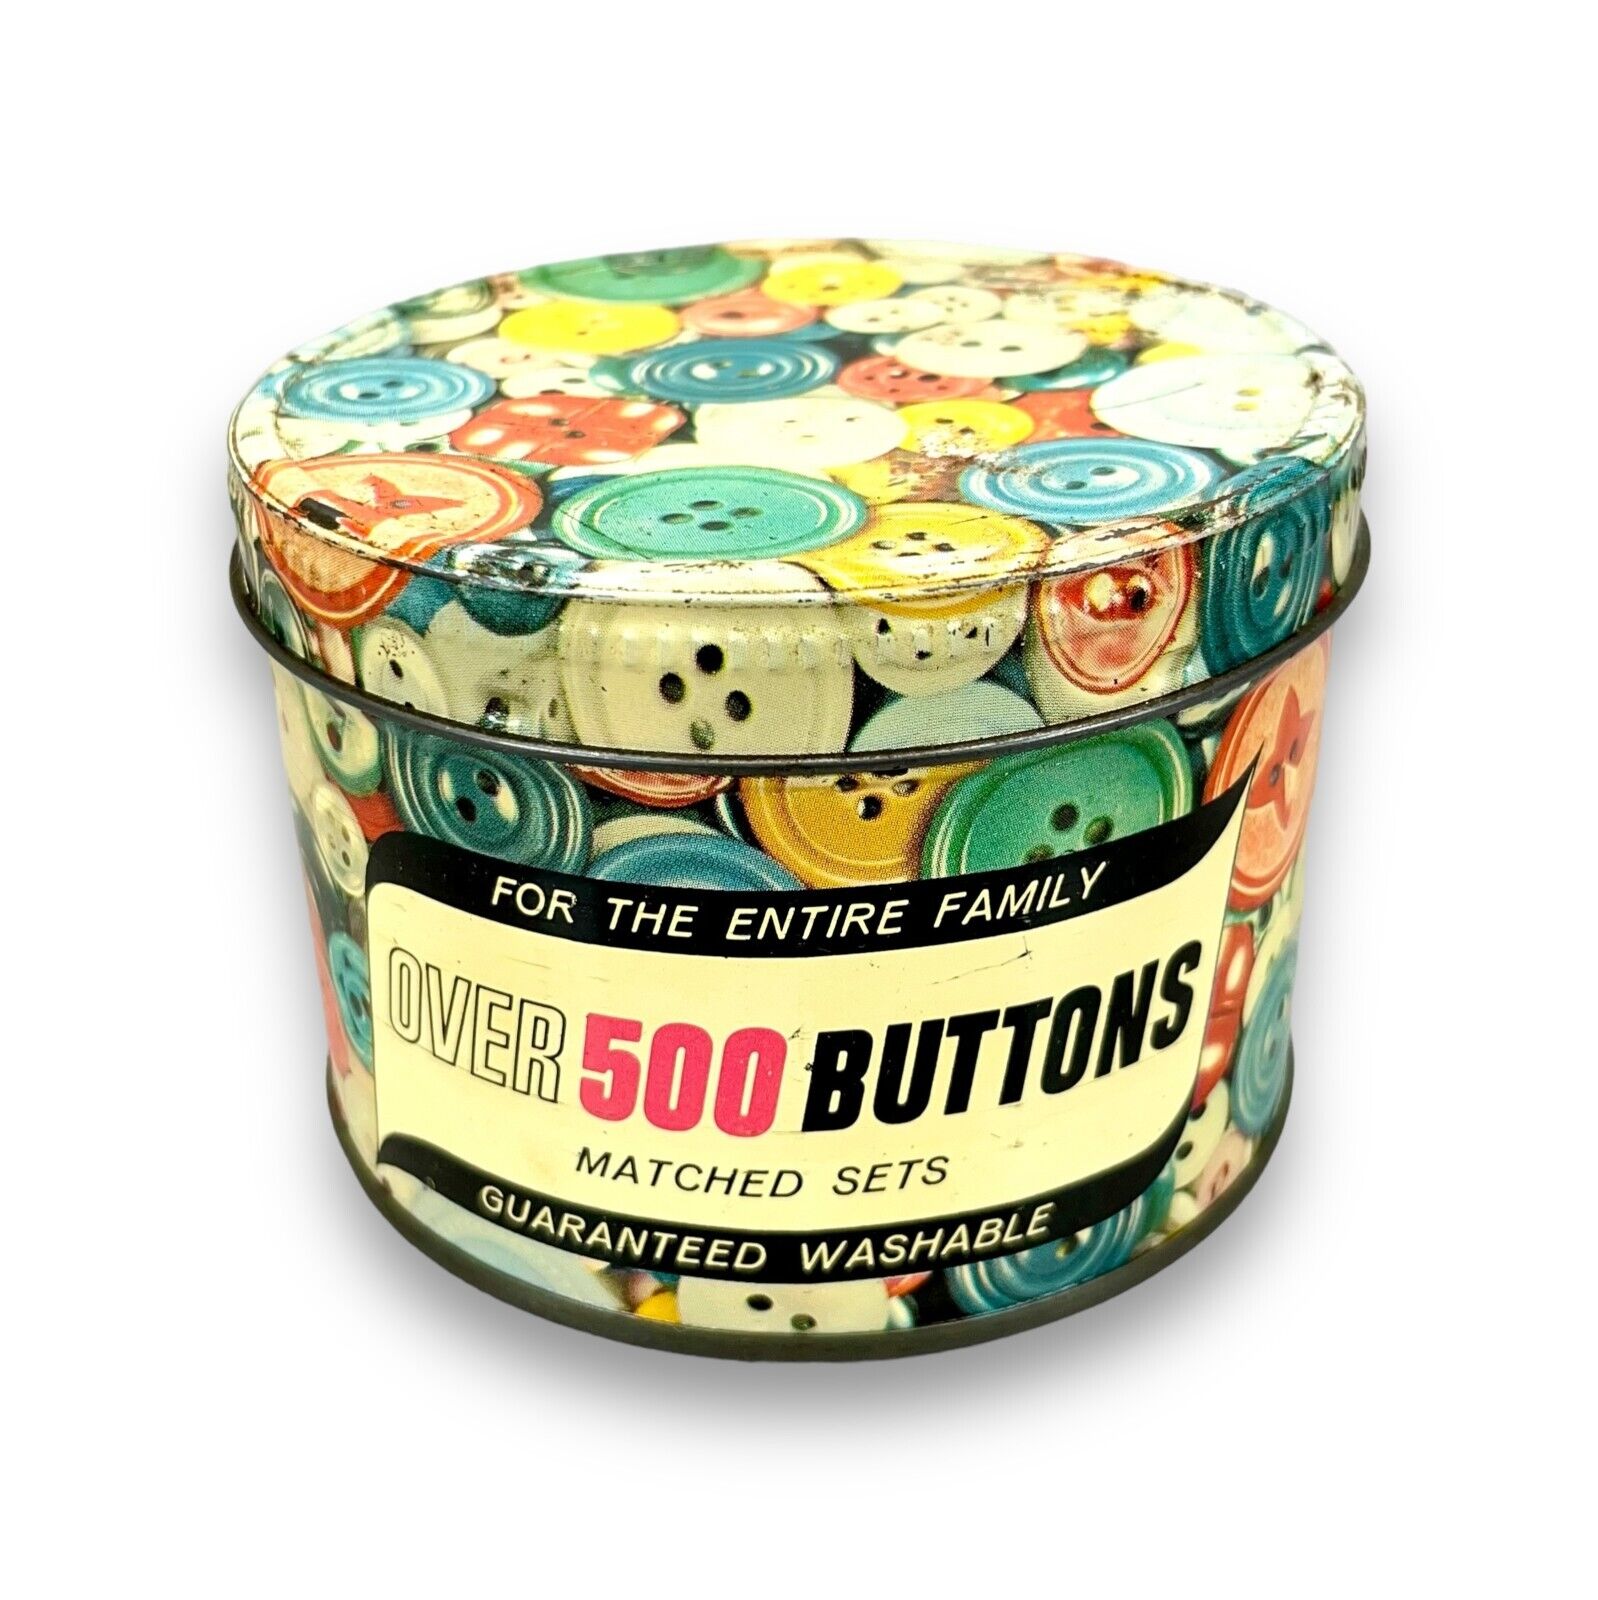 Vintage Button Tin Over 500 Buttons Colorful Litho Trinket Stash Sewing Box